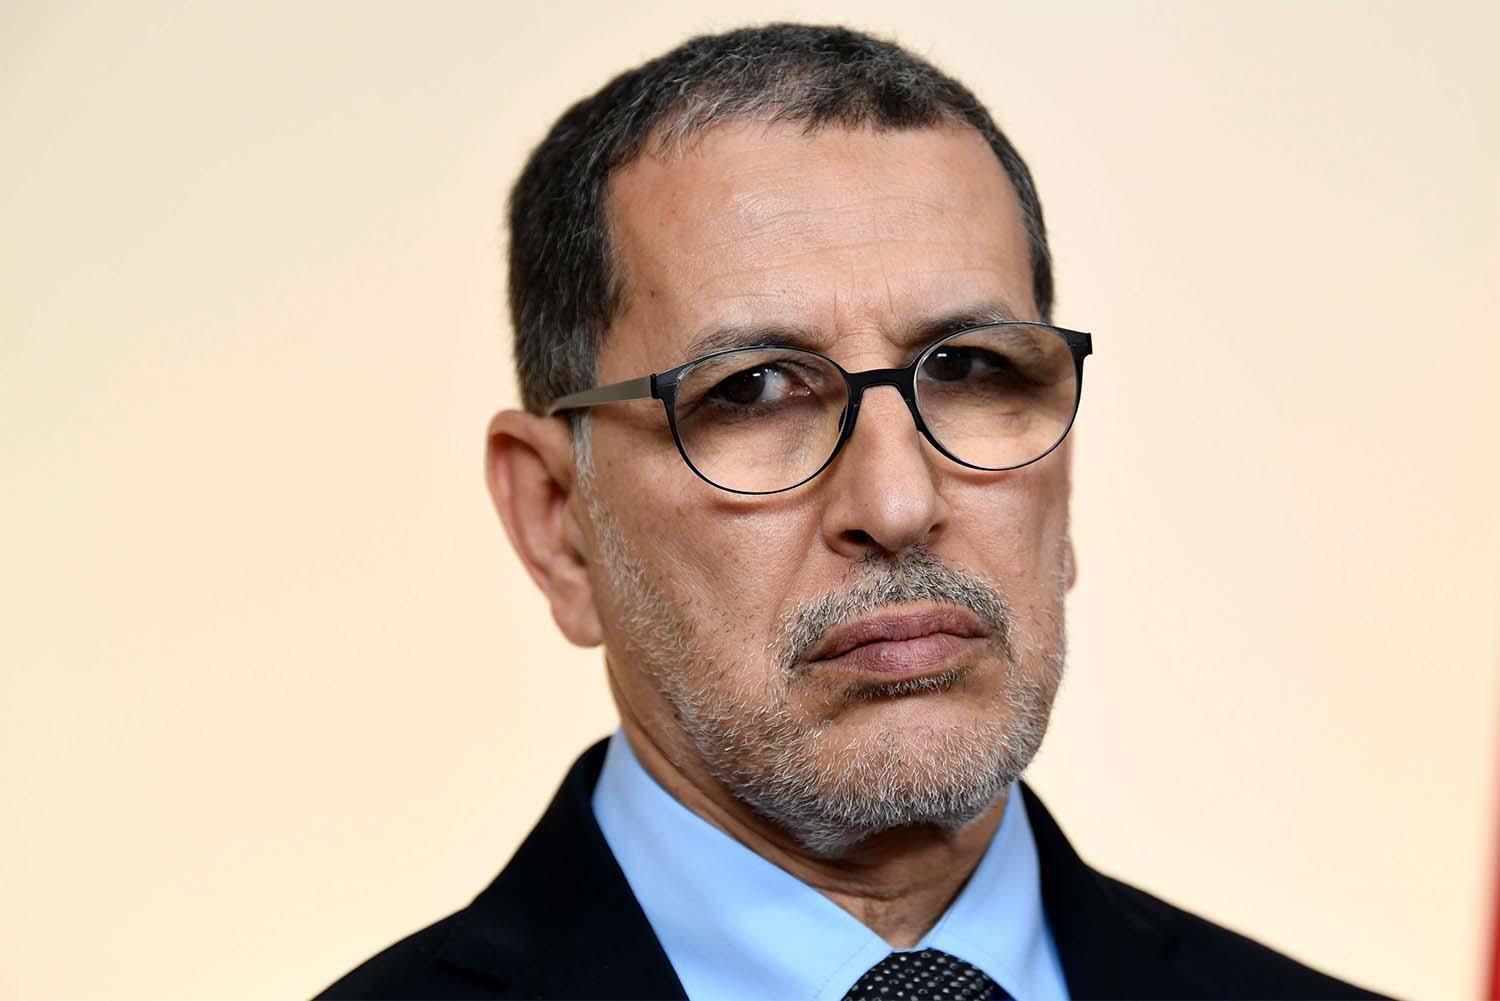 Morocco threatens a legal action against the allegations